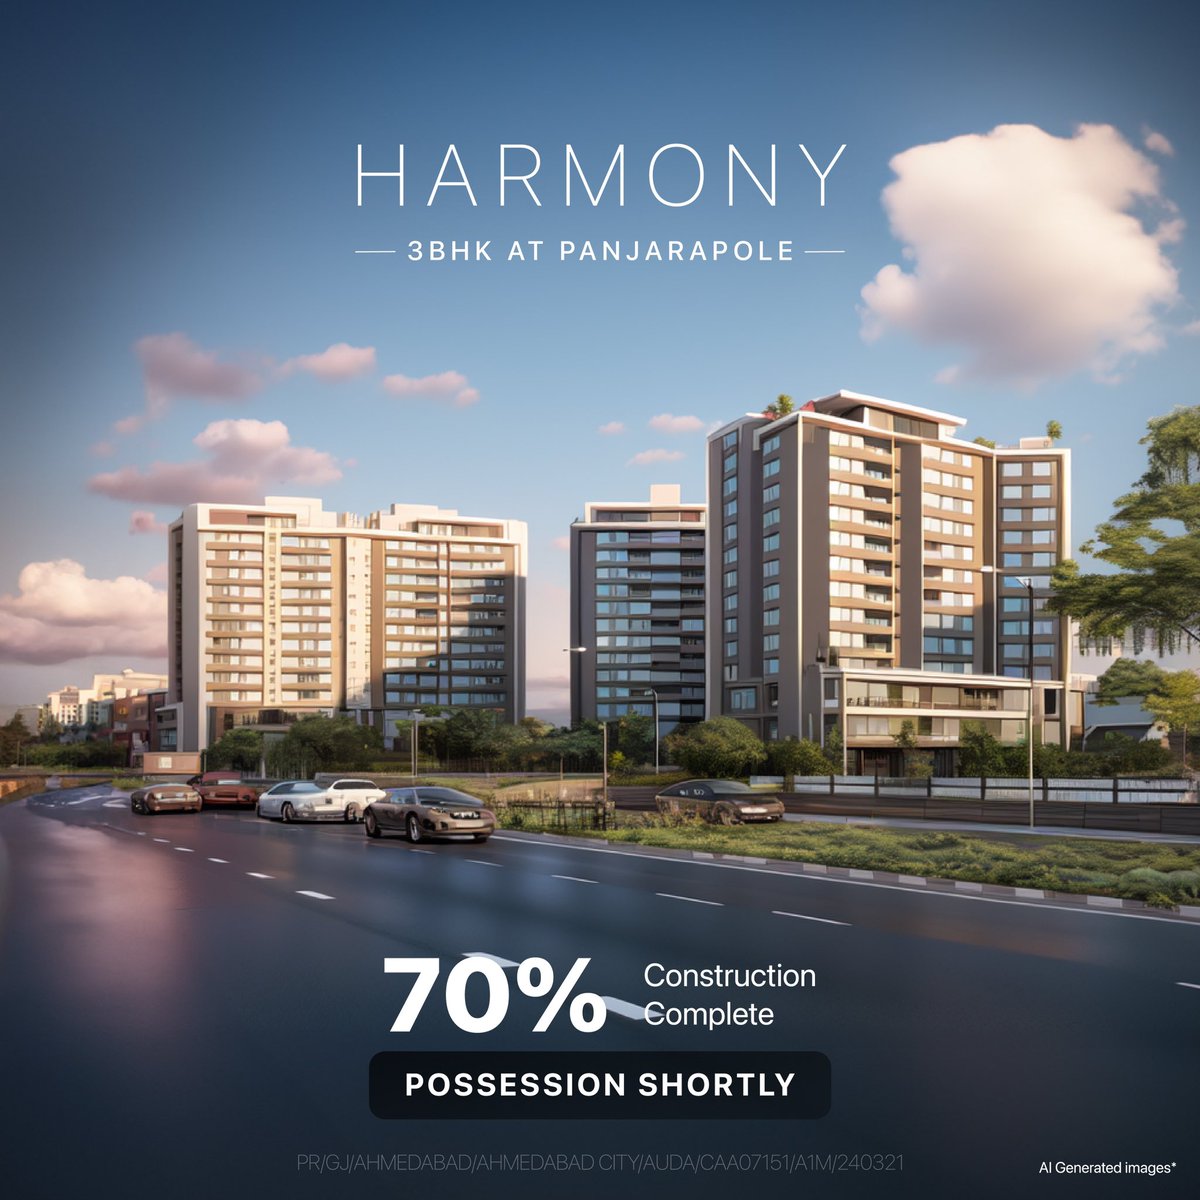 Live in the heart of the city at Panjrapole.

Possession soon at Shivalik Sharda Harmony.

Book your 3BHK home, call us on +91 75 75 00 7344

#Shivalik #ShivalikGroup #Buildinglandmarks #RealEstate #NewRealEstateProject #DreamHome #luxurioushomes #retailspaces #primelocation